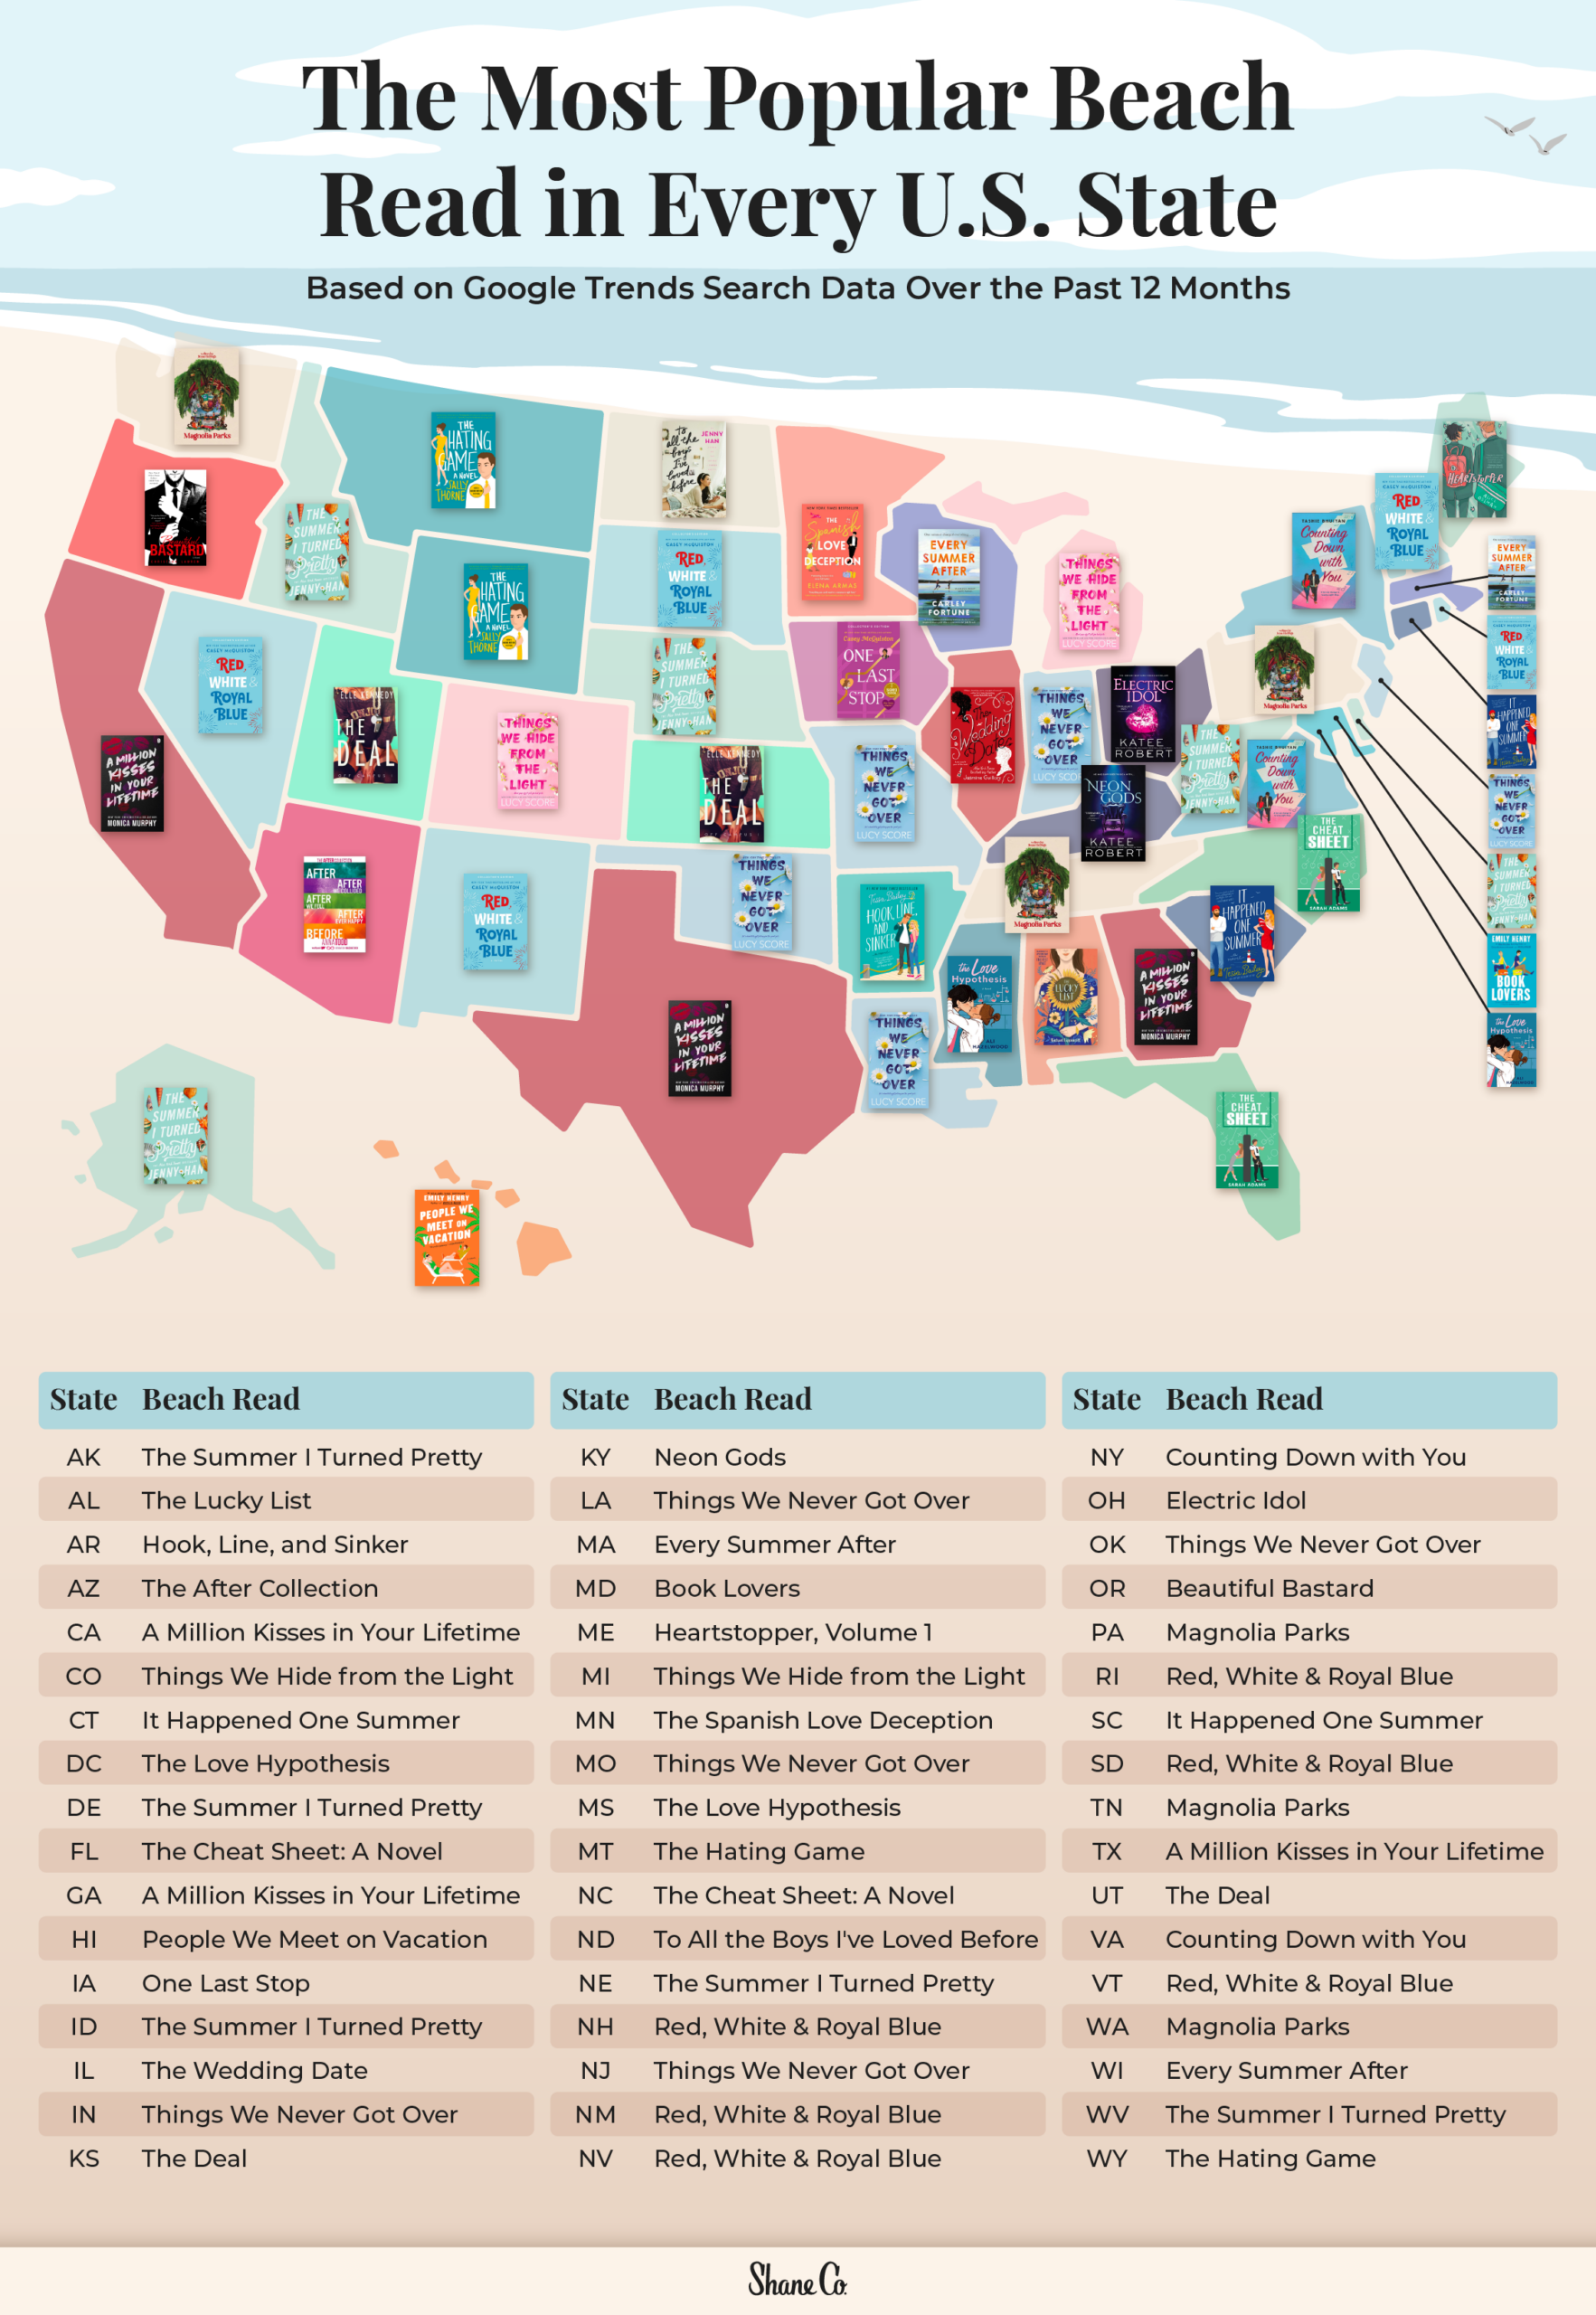 A U.S. map showing the most popular beach read in every state